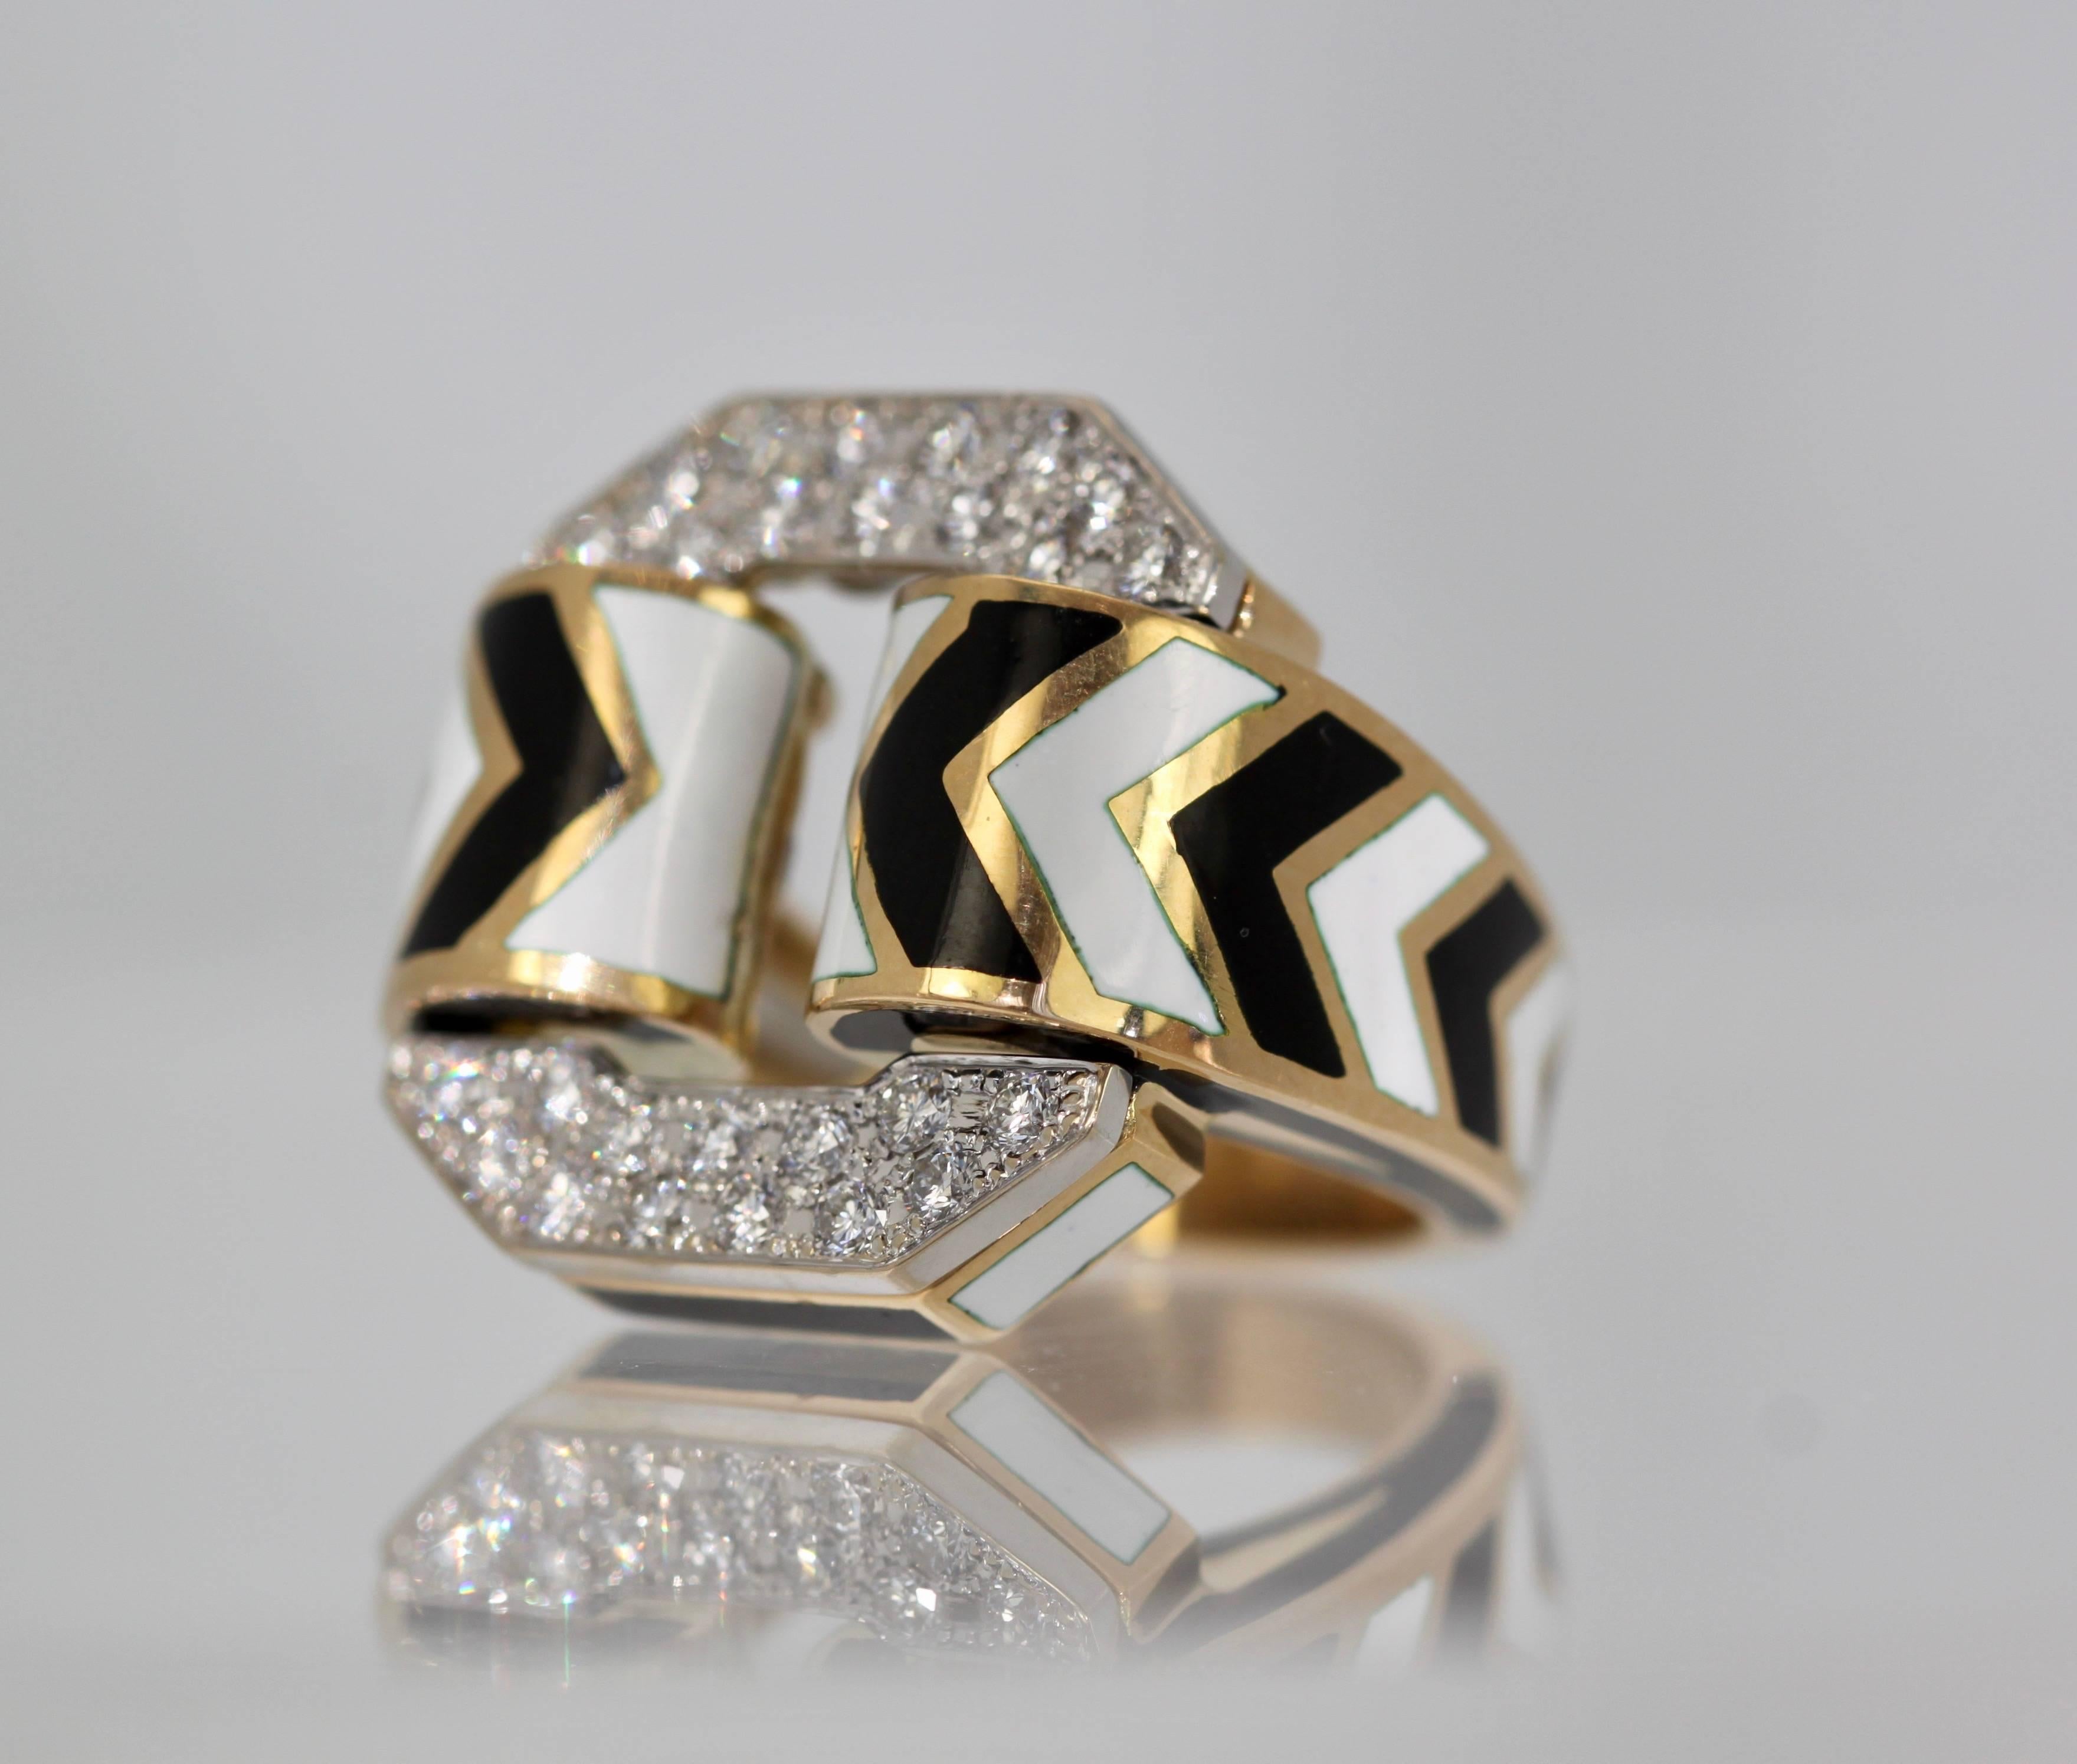 Gorgeous David Webb Iconic Buckle ring in Zebra print.  I have owned many of these buckle rings, black enamel, white enamel and zebra enamel which happens to be my favorite.  This ring is substantial and heavy and of course the diamonds are the best